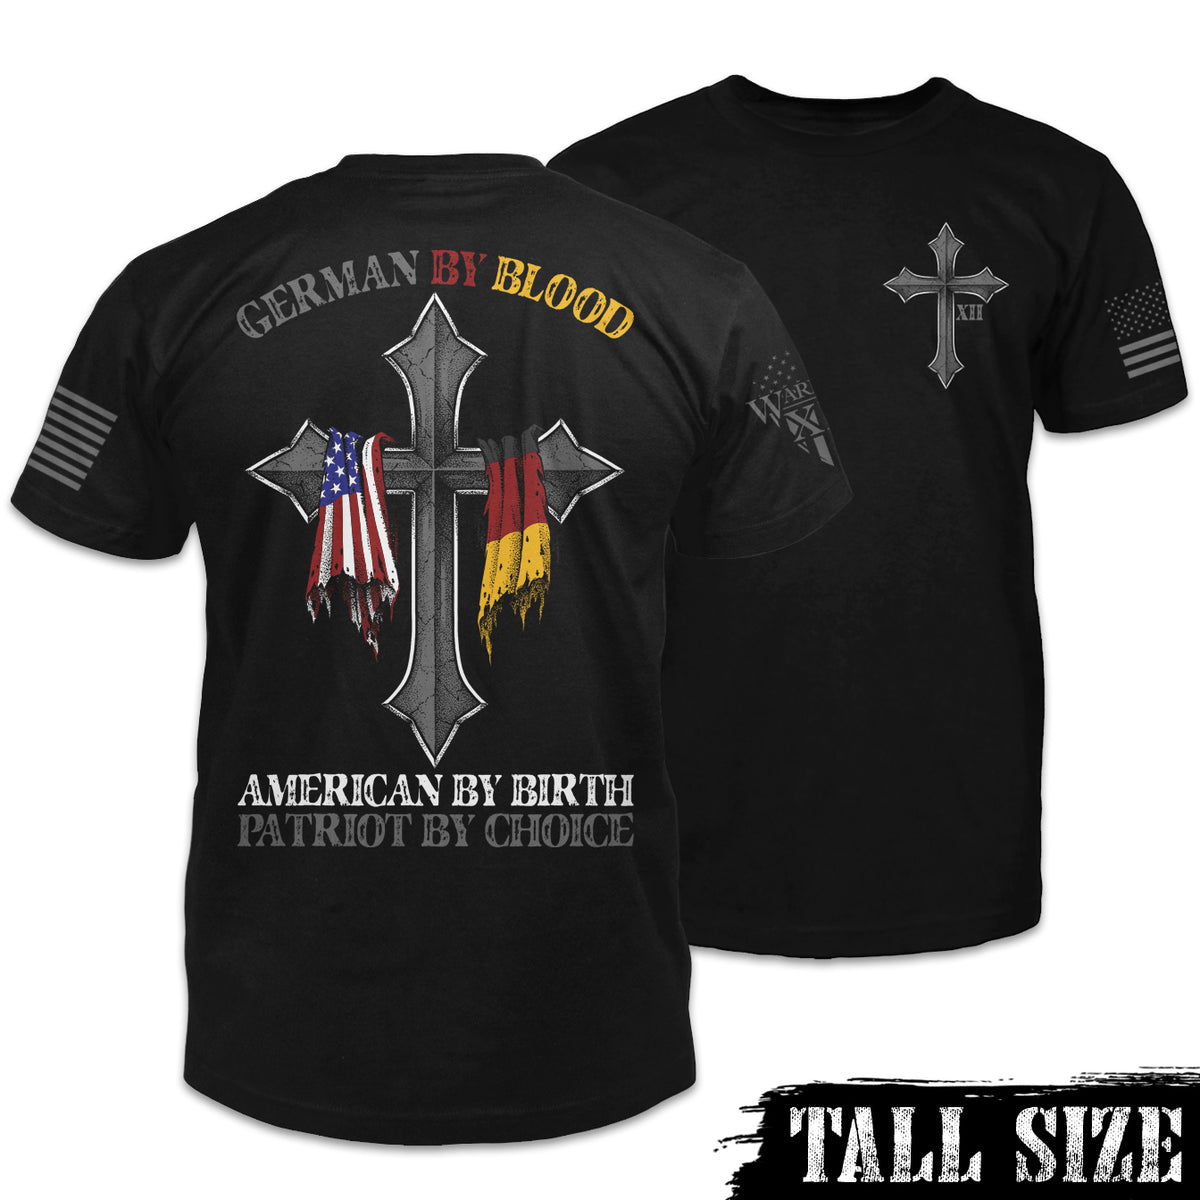 Front & back black tall size shirt with the words 'German by blood, American by birth, patriot by choice" and a cross with the German and USA flag hanging over it printed on the shirt.